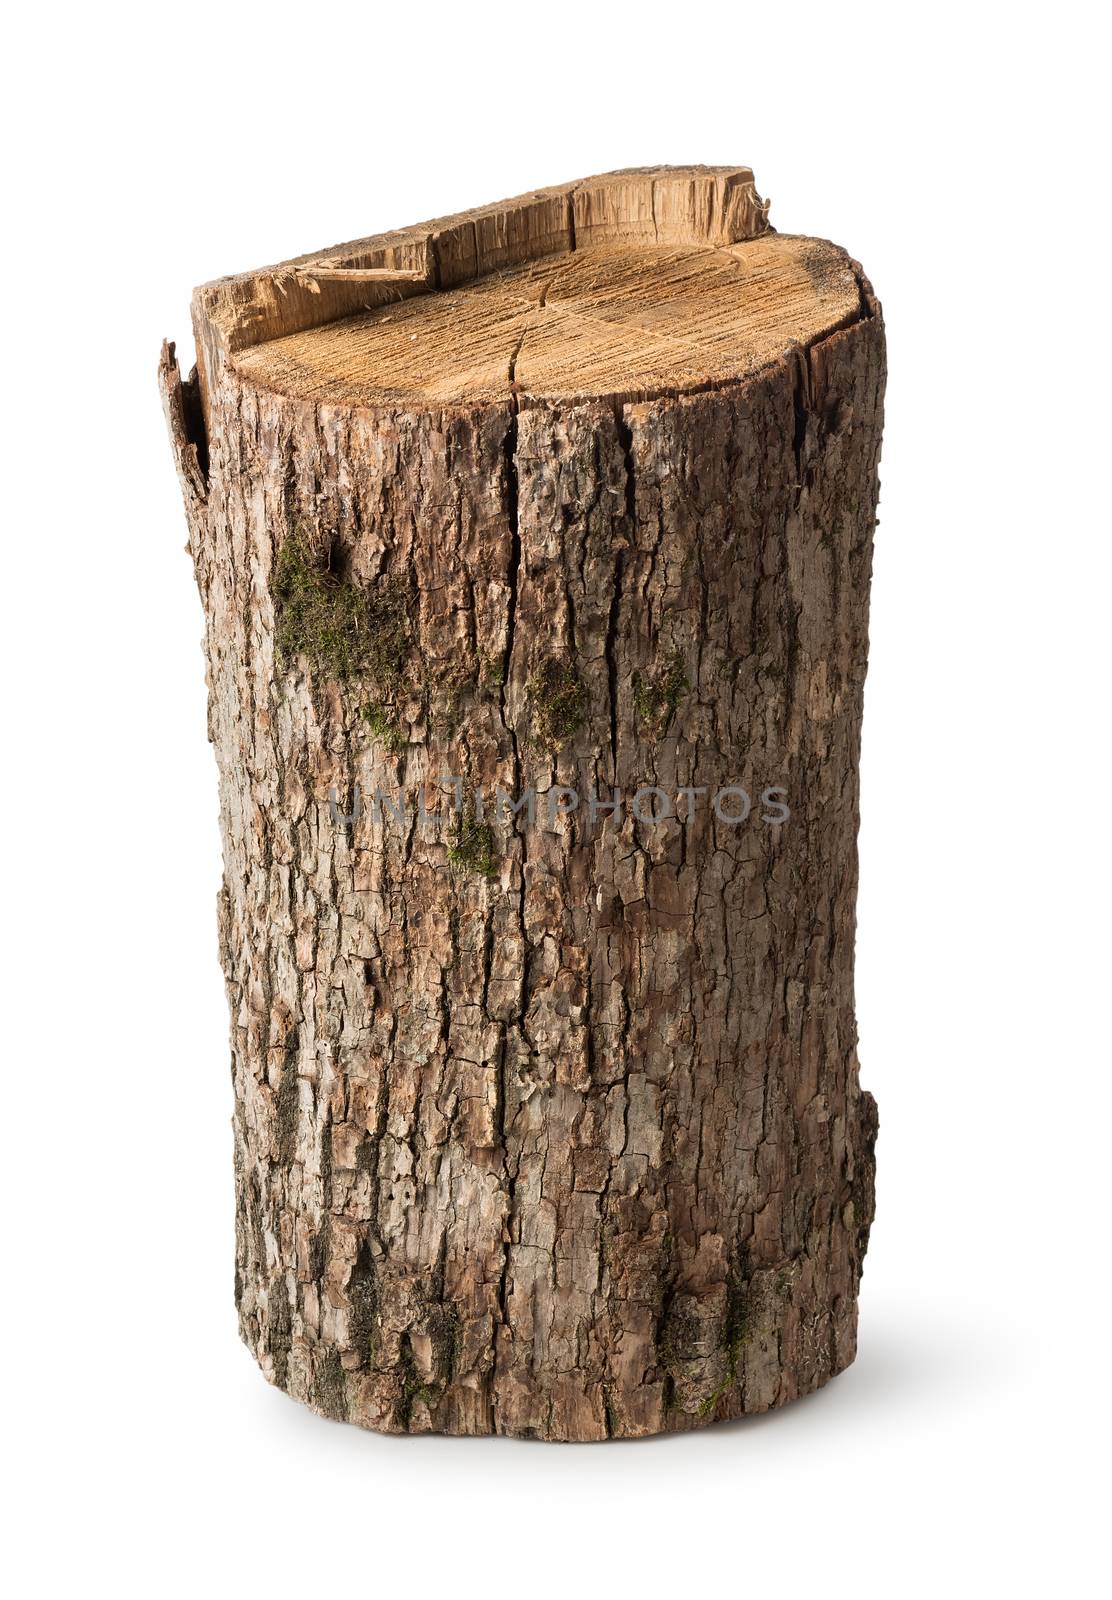 Big stump isolated on a white background